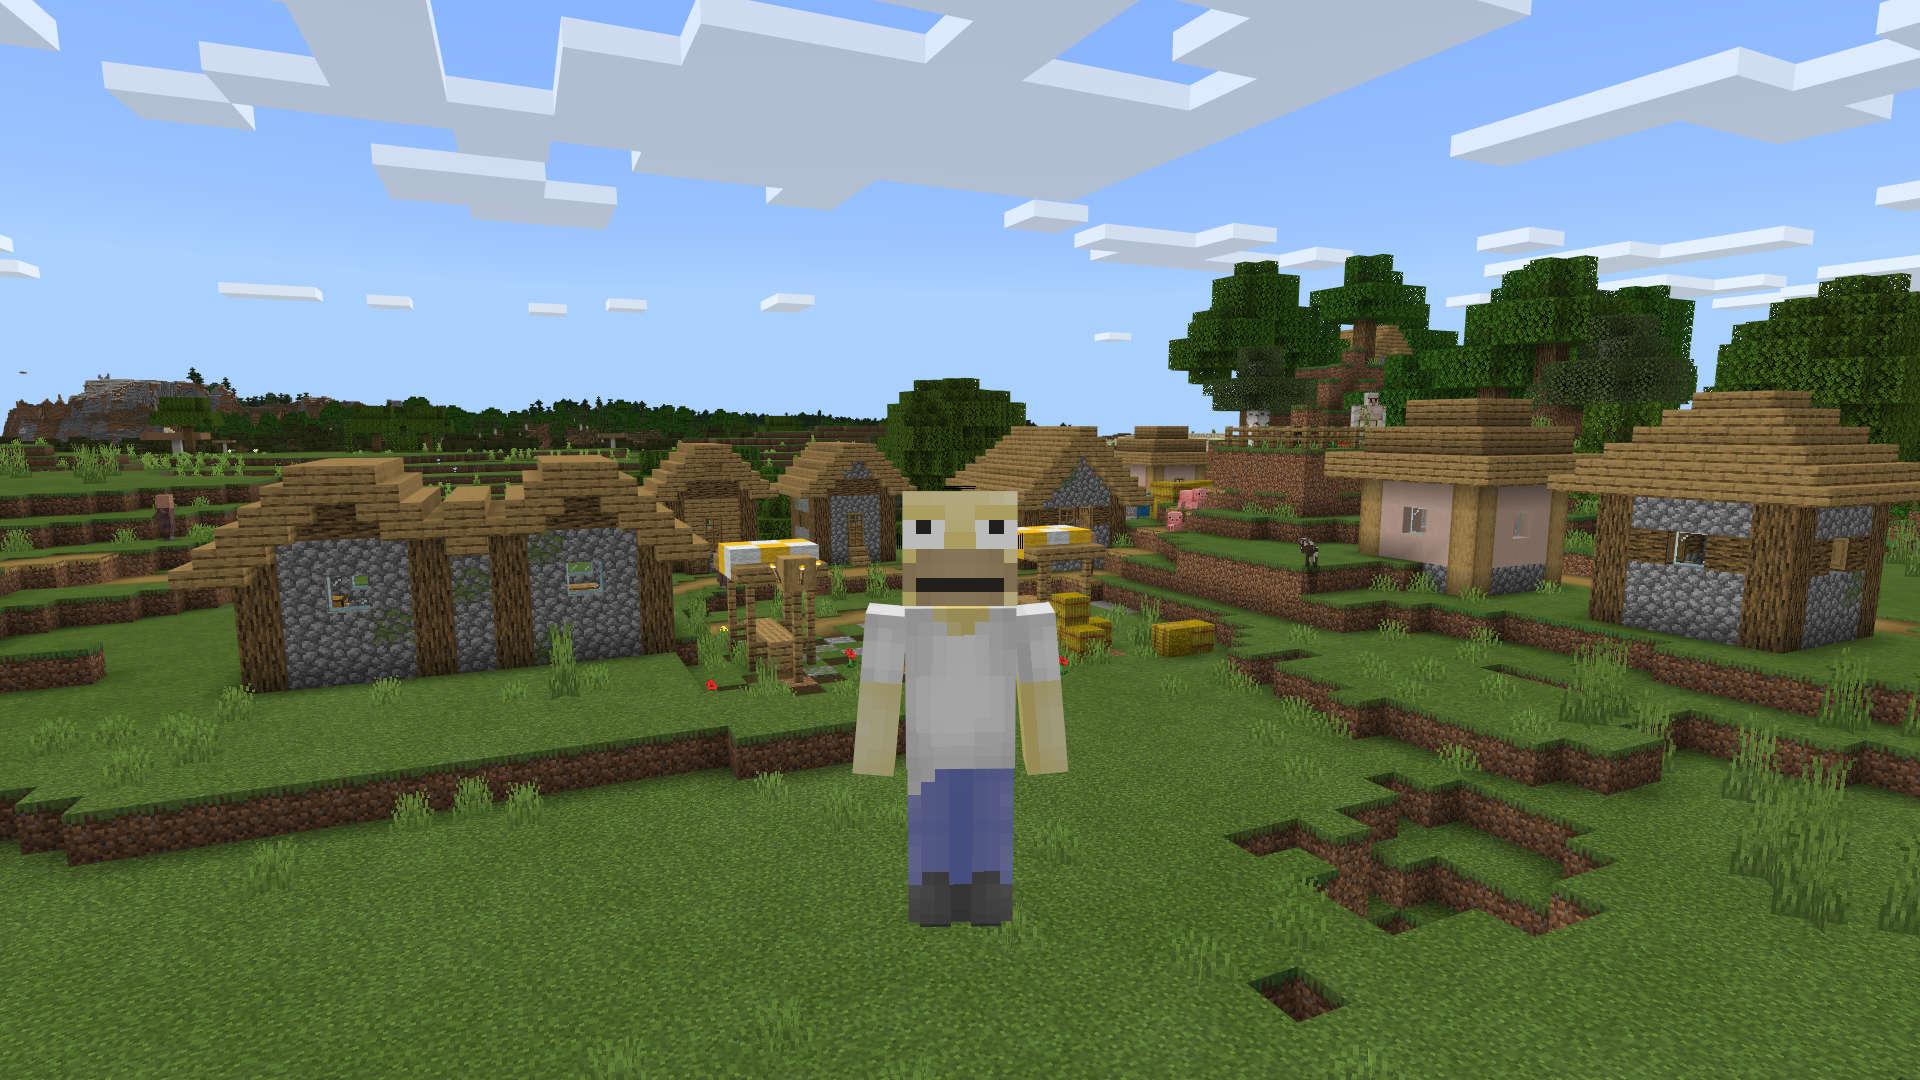 Minecraft skins: a player using the Bright Girl skin floating above a woodland area.